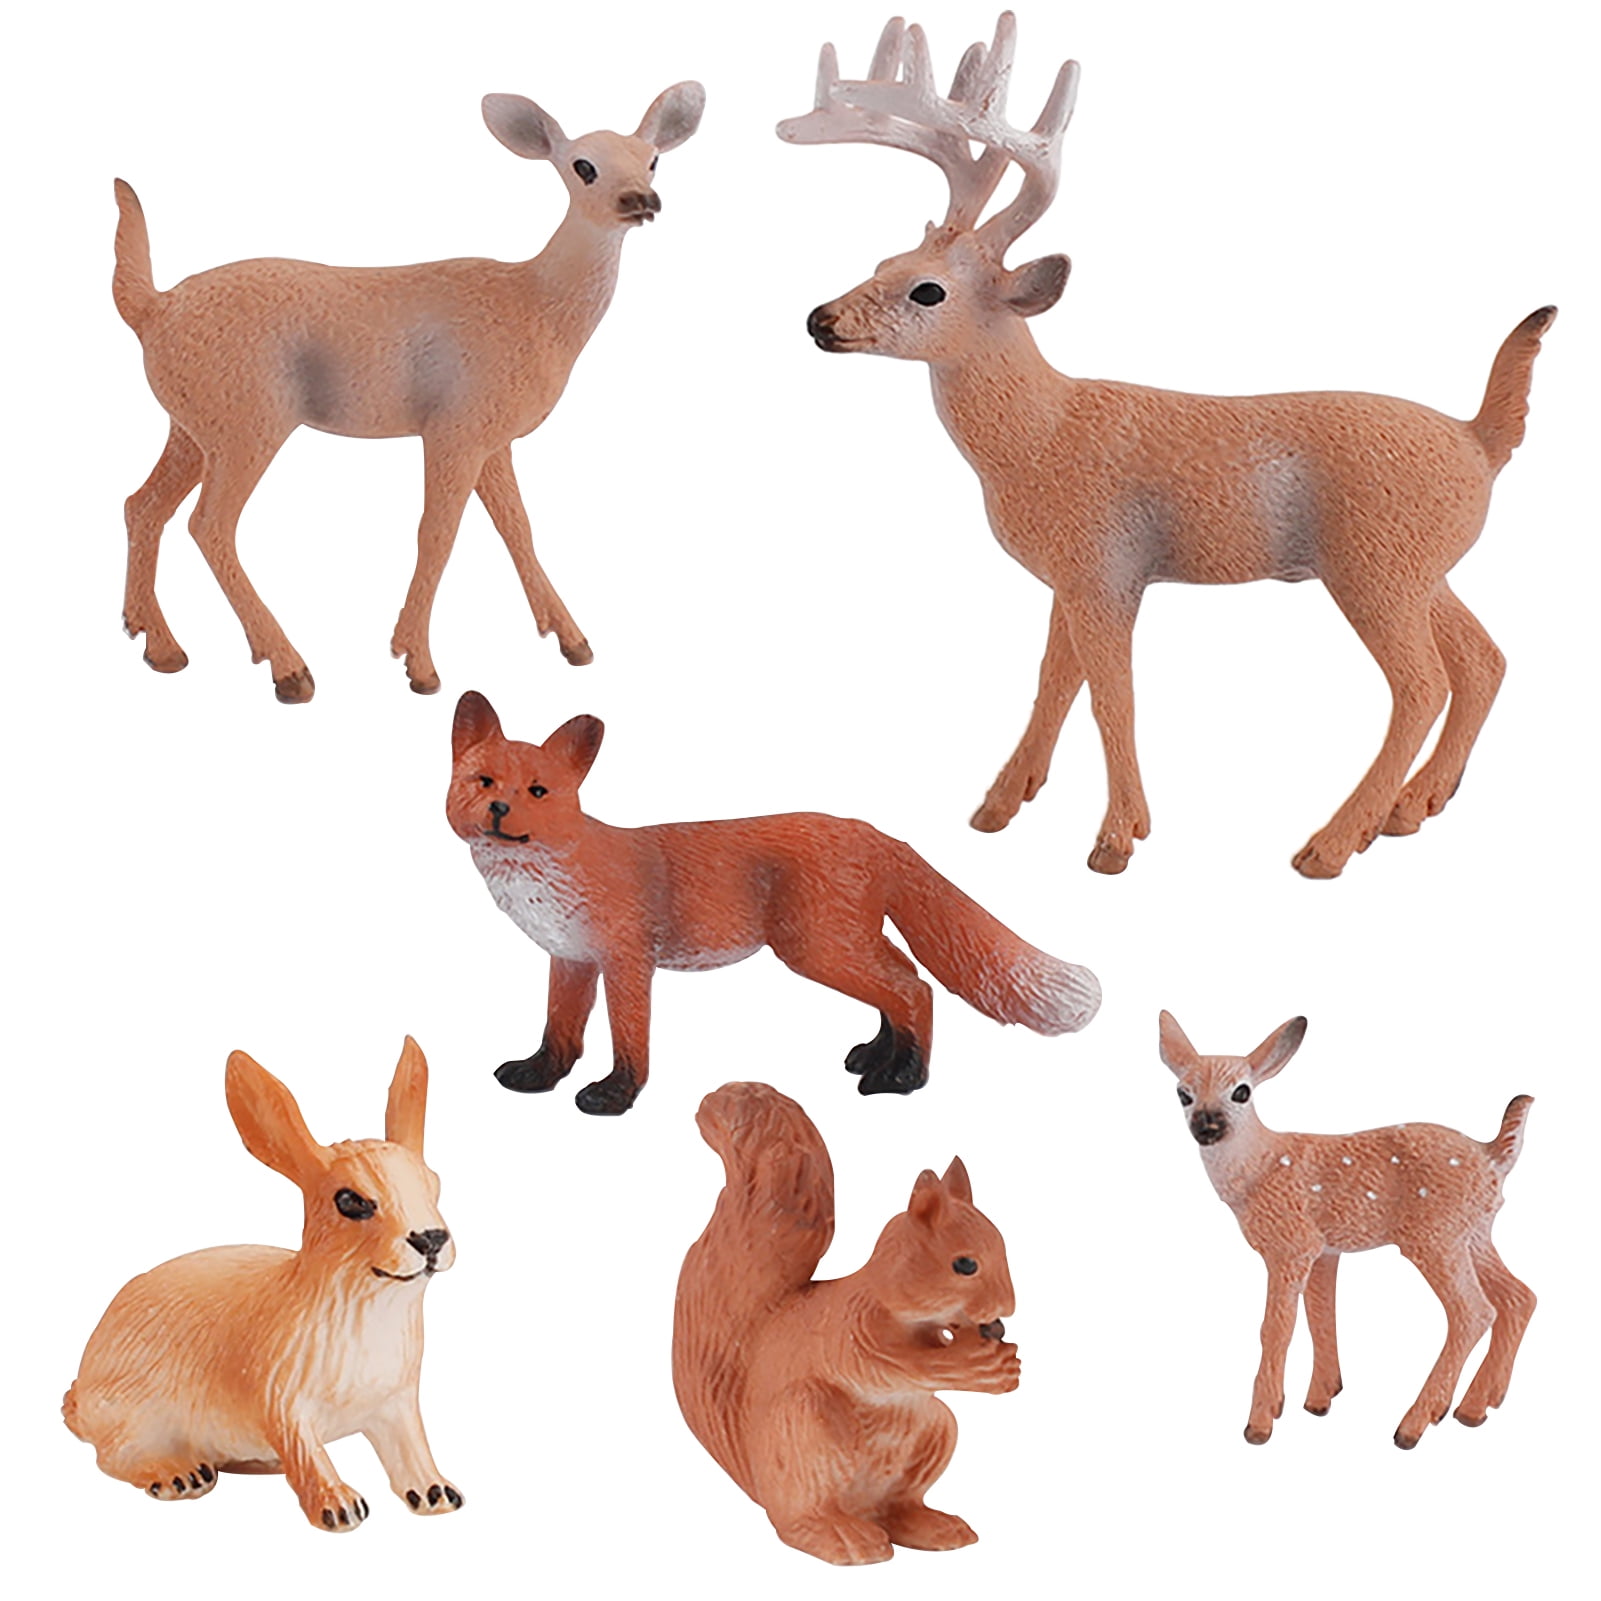 Playmobil Forest Wilderness Animal Tan Baby Deer Fawn 